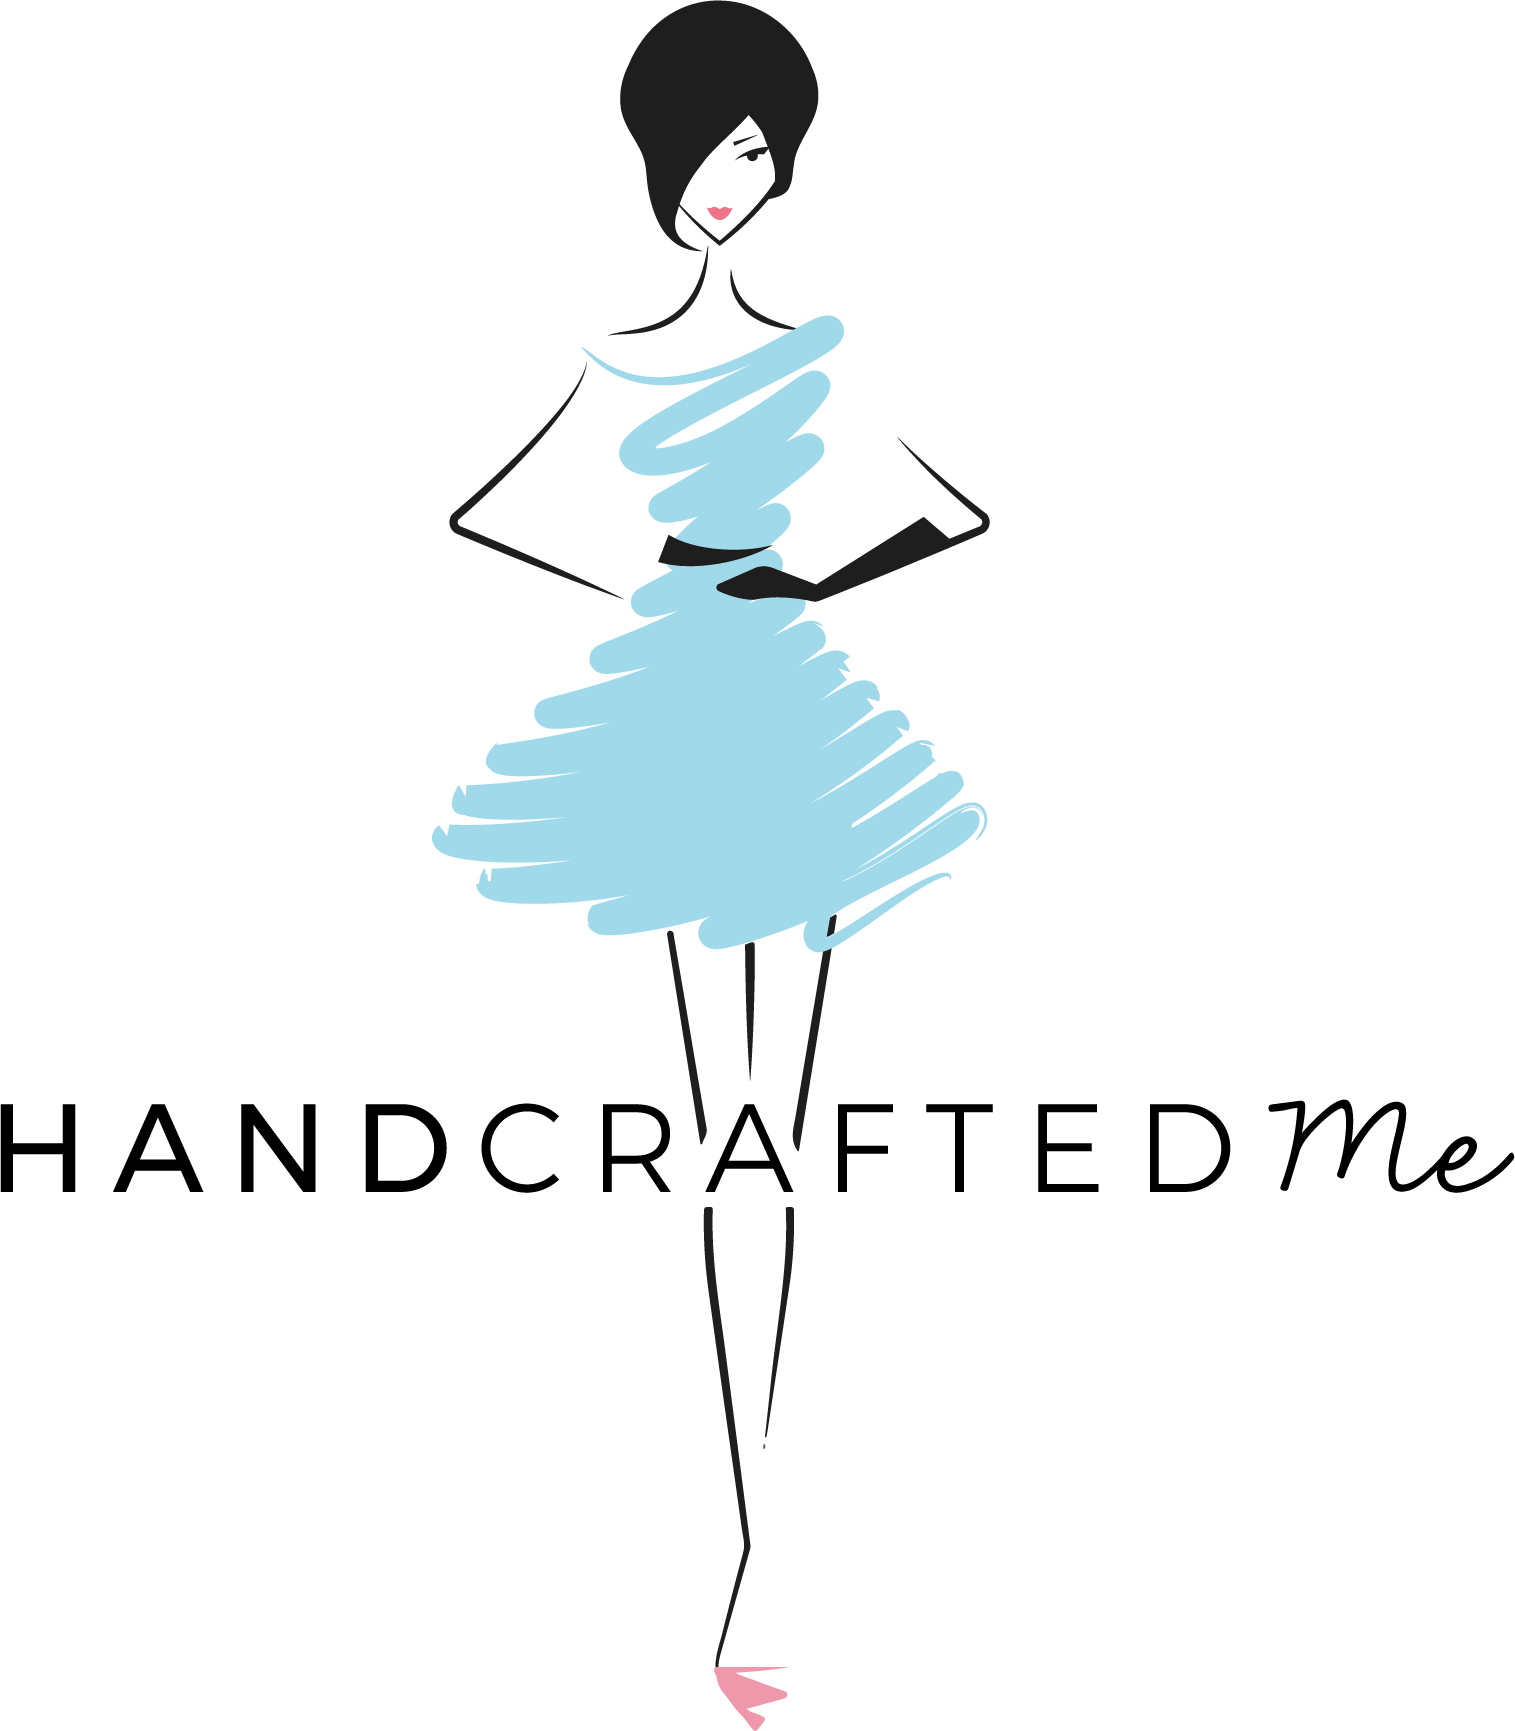 Handcrafted Me